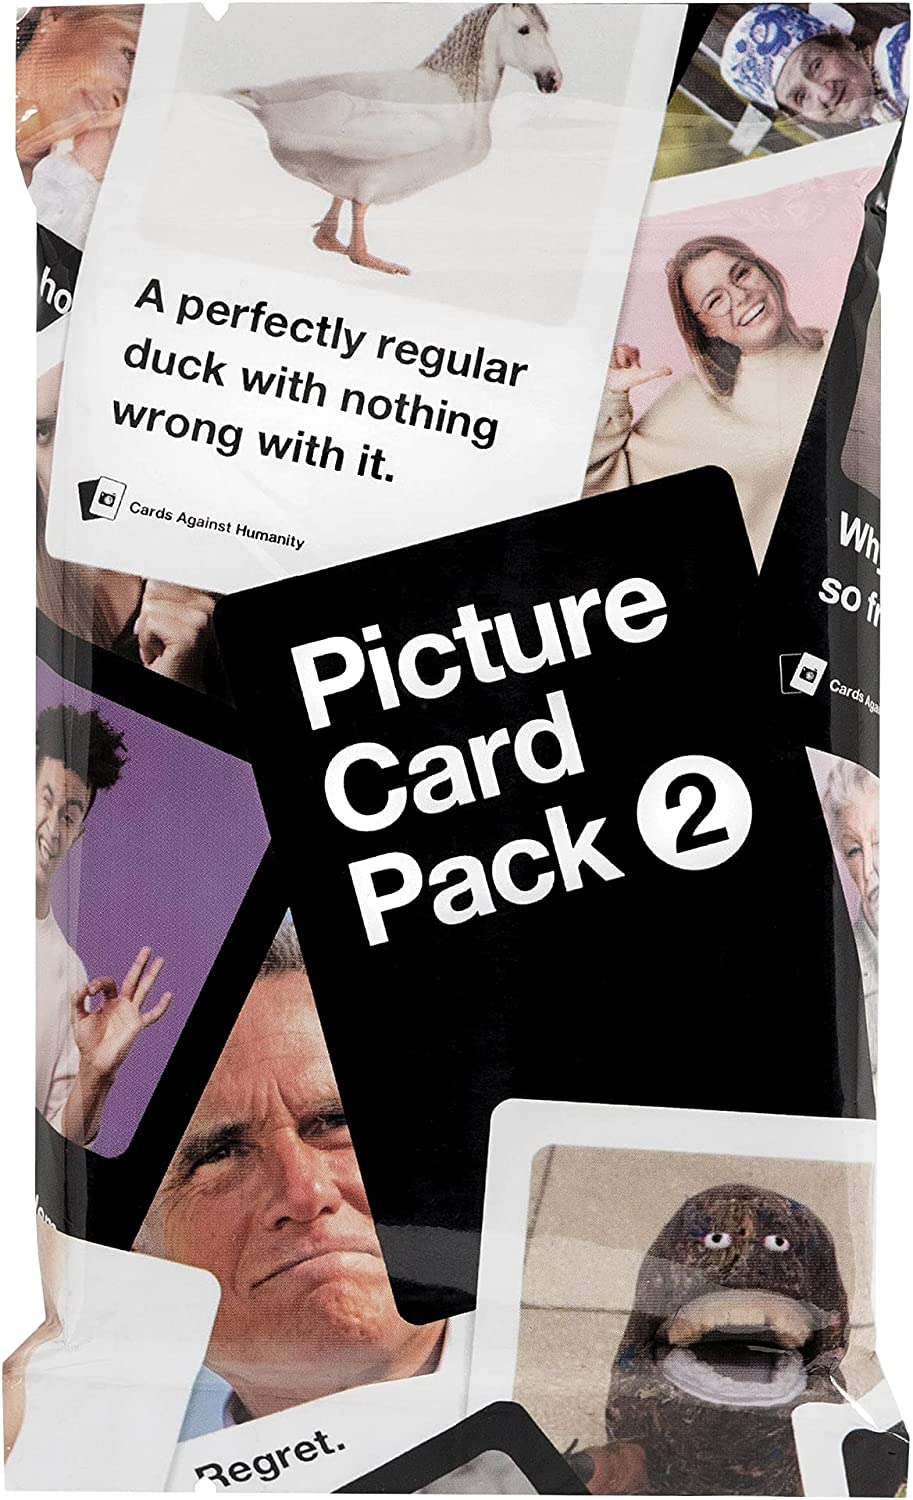 Cards Against Humanity: Picture Card Pack 2 $4 + Free Shipping w/ Prime or on orders over $25